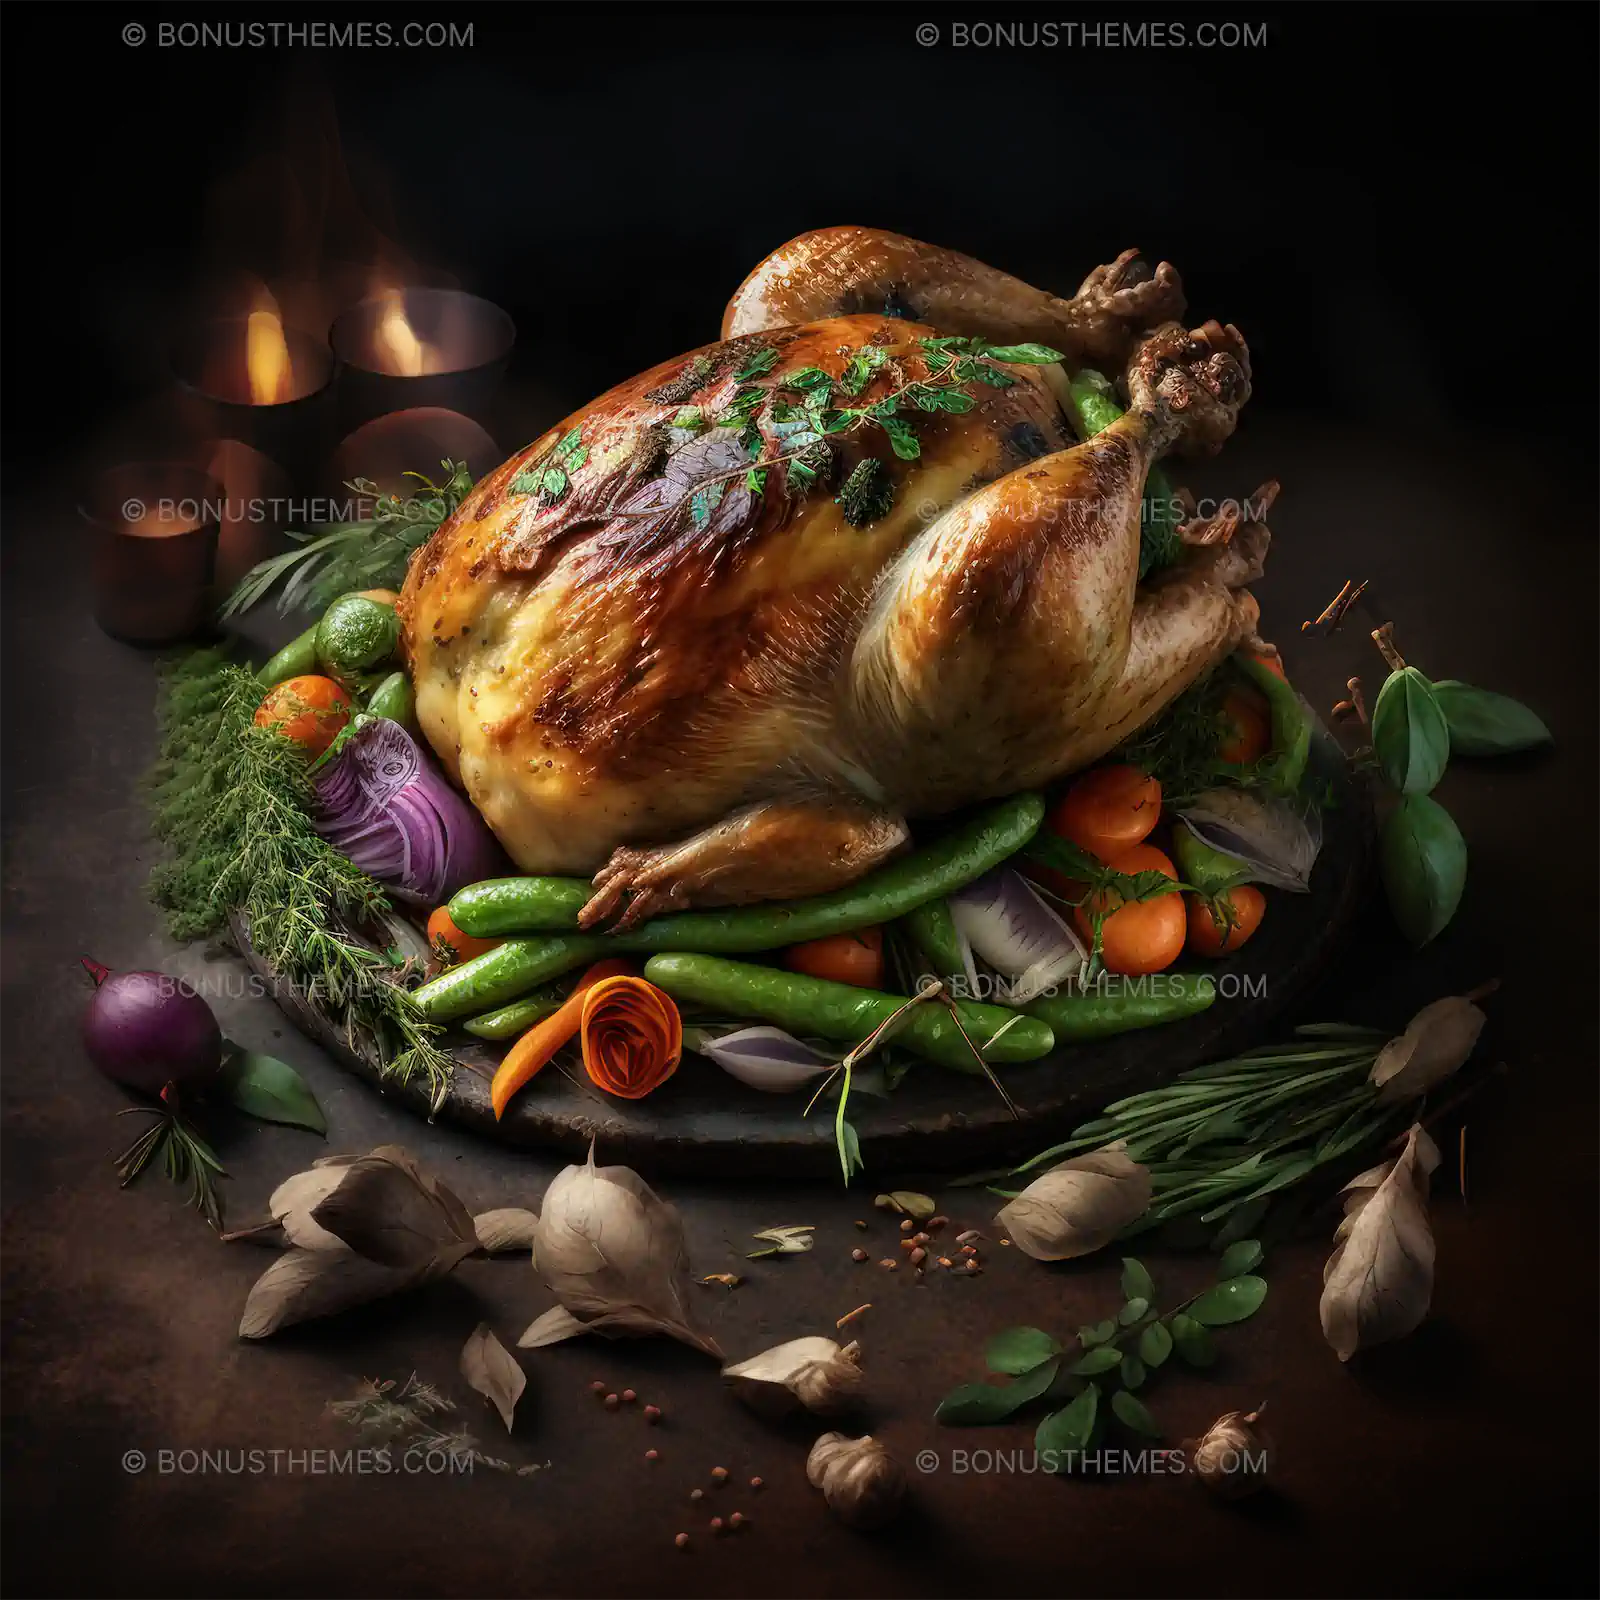 A roasted chicken with vegetables arranged on a wooden platter